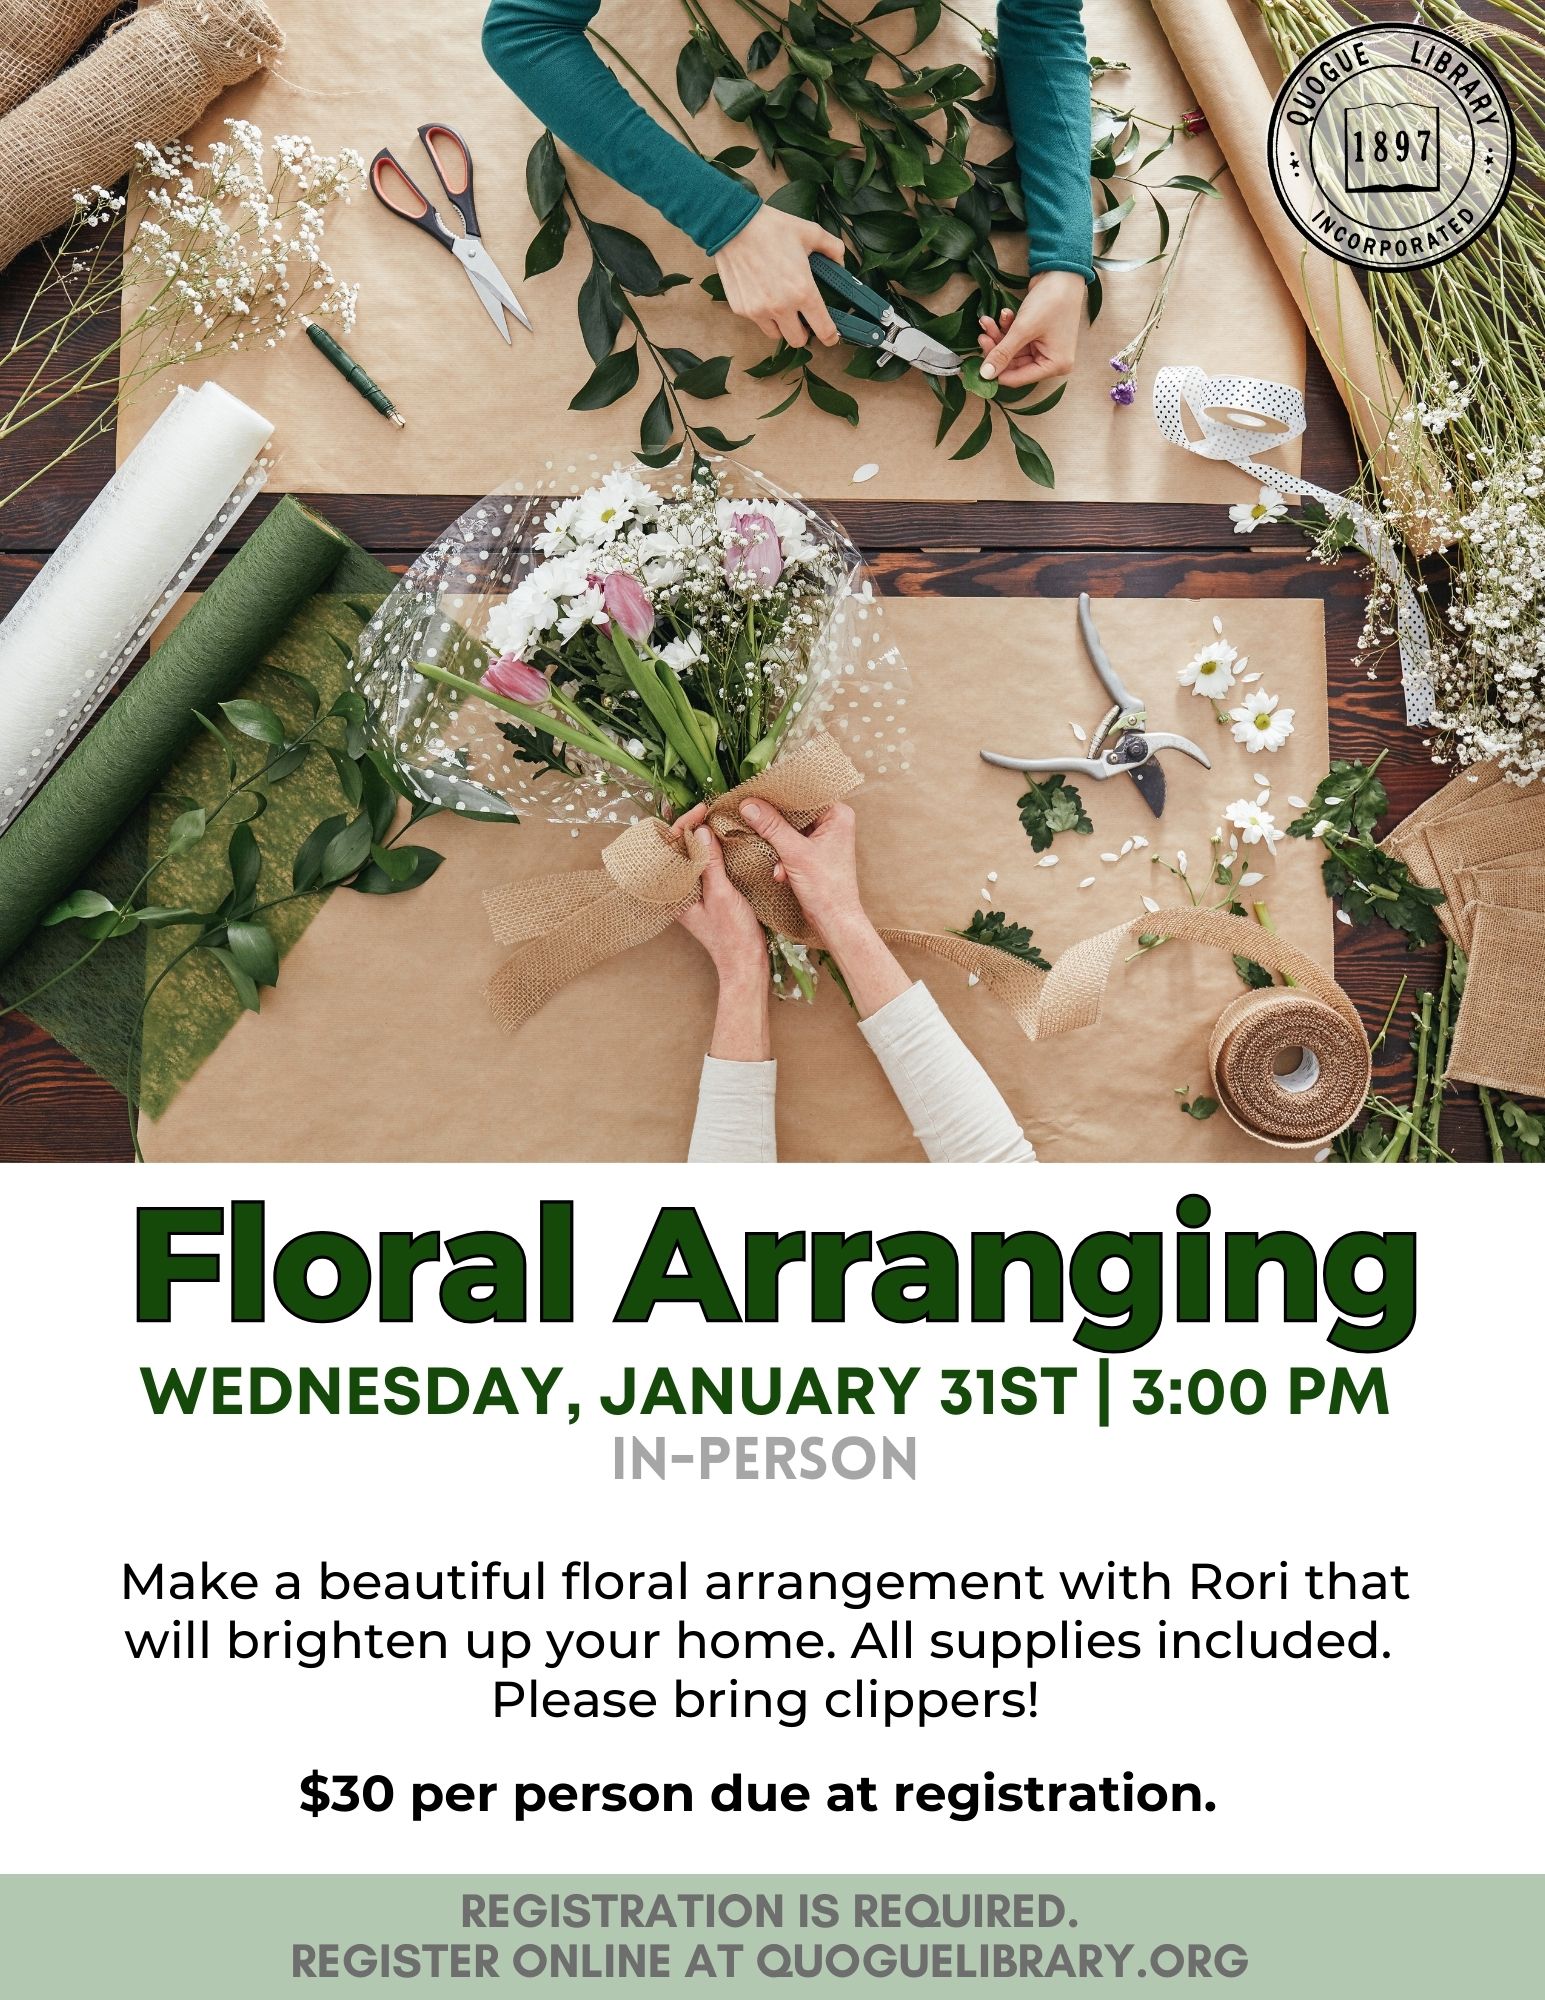 Floral Arranging Quogue Library